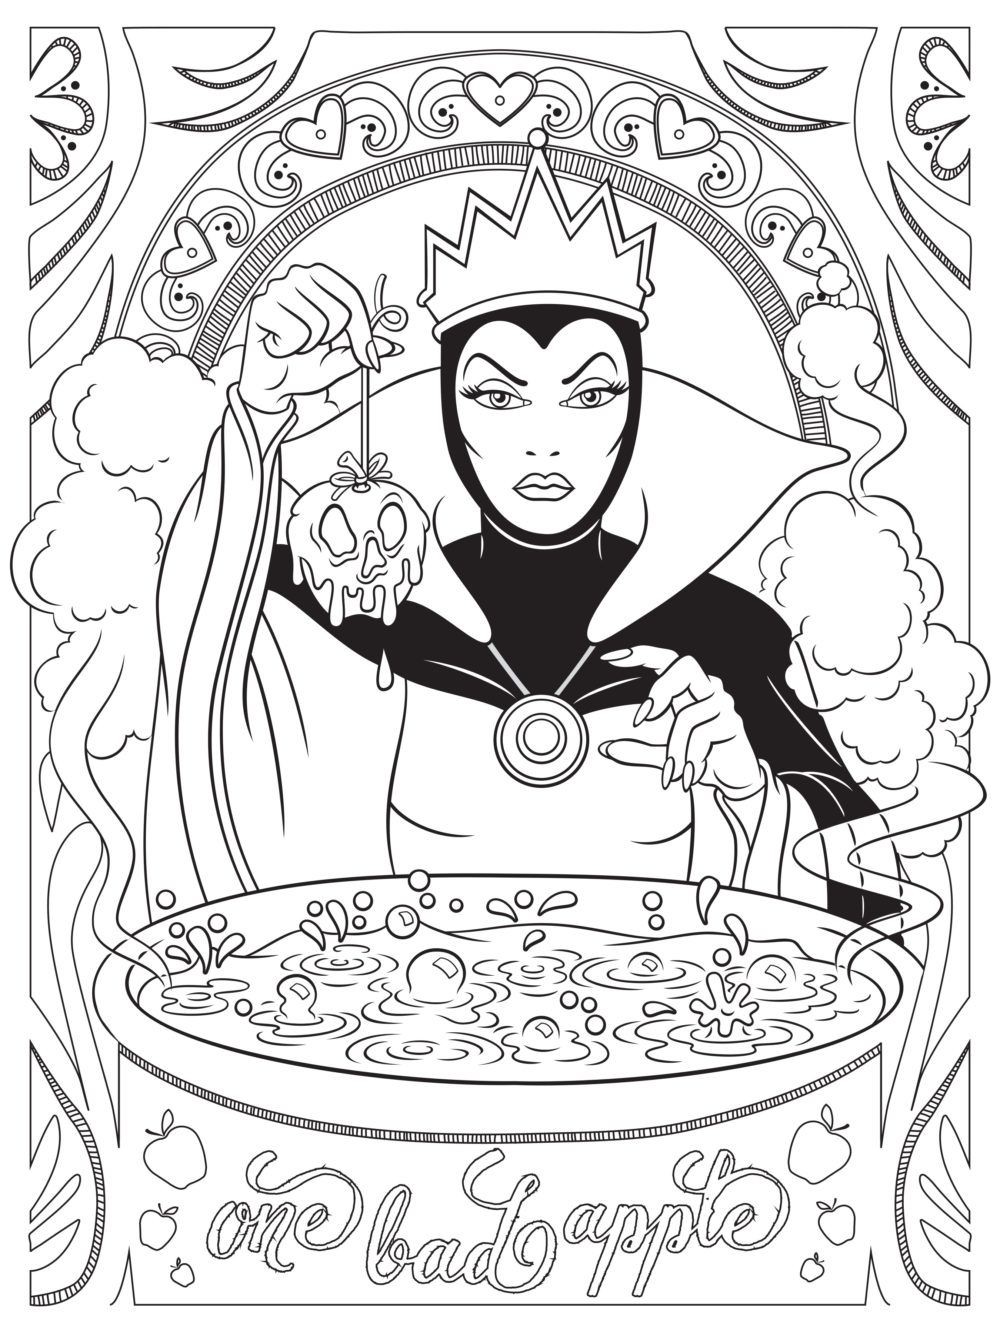 Celebrate National Coloring Book Day with Disney Style Evil Queen coloring page